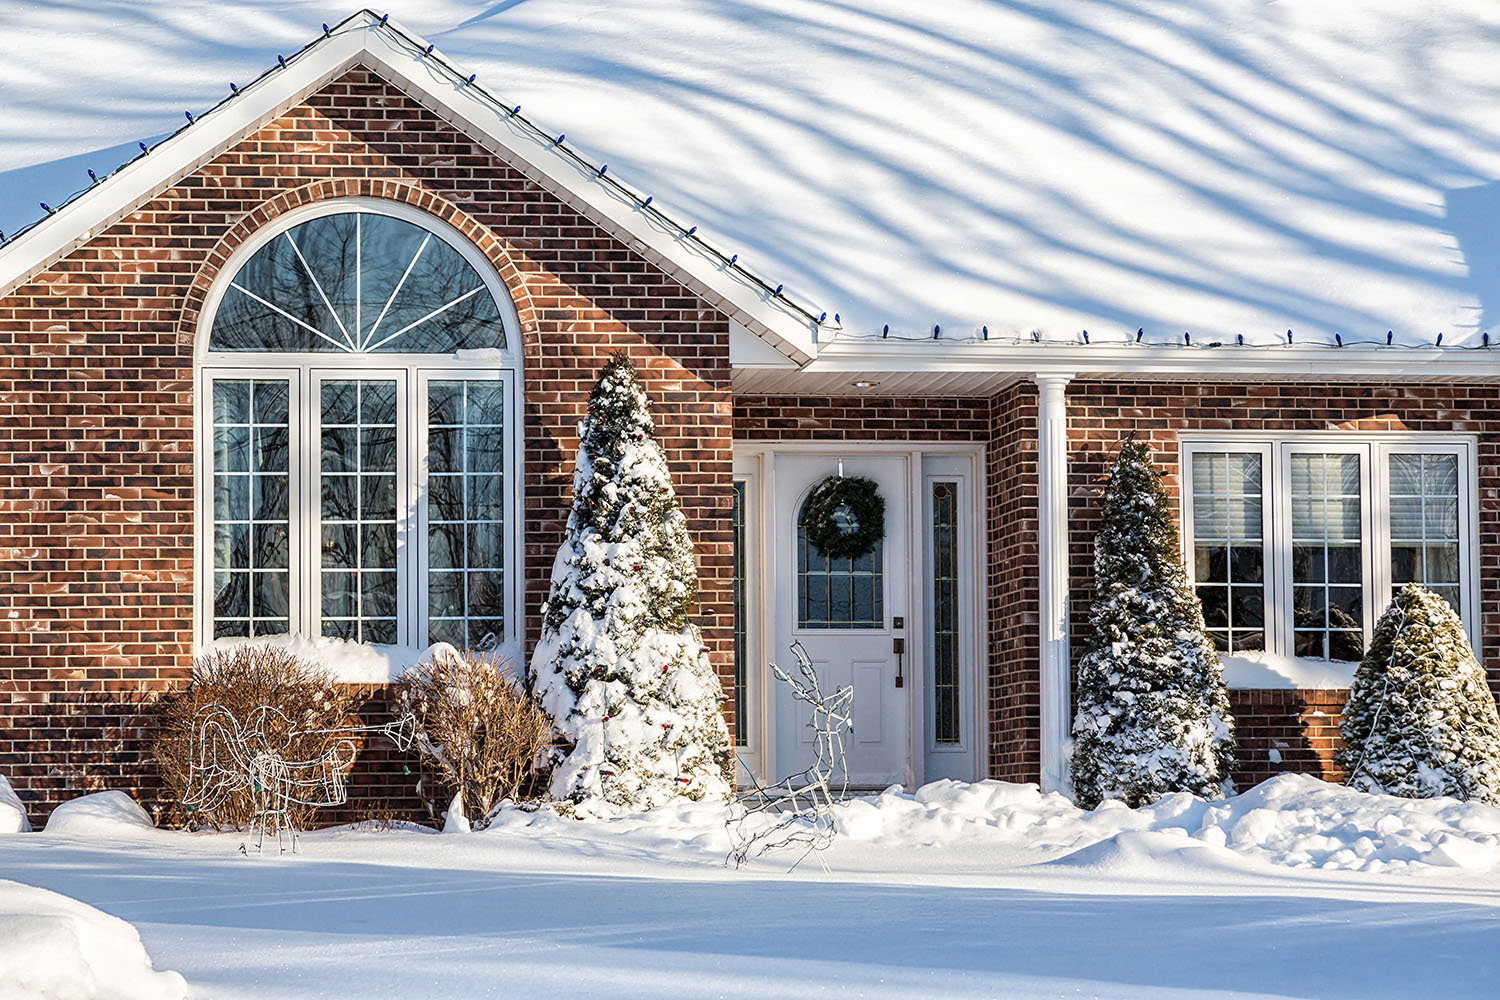 Protect your home this winter